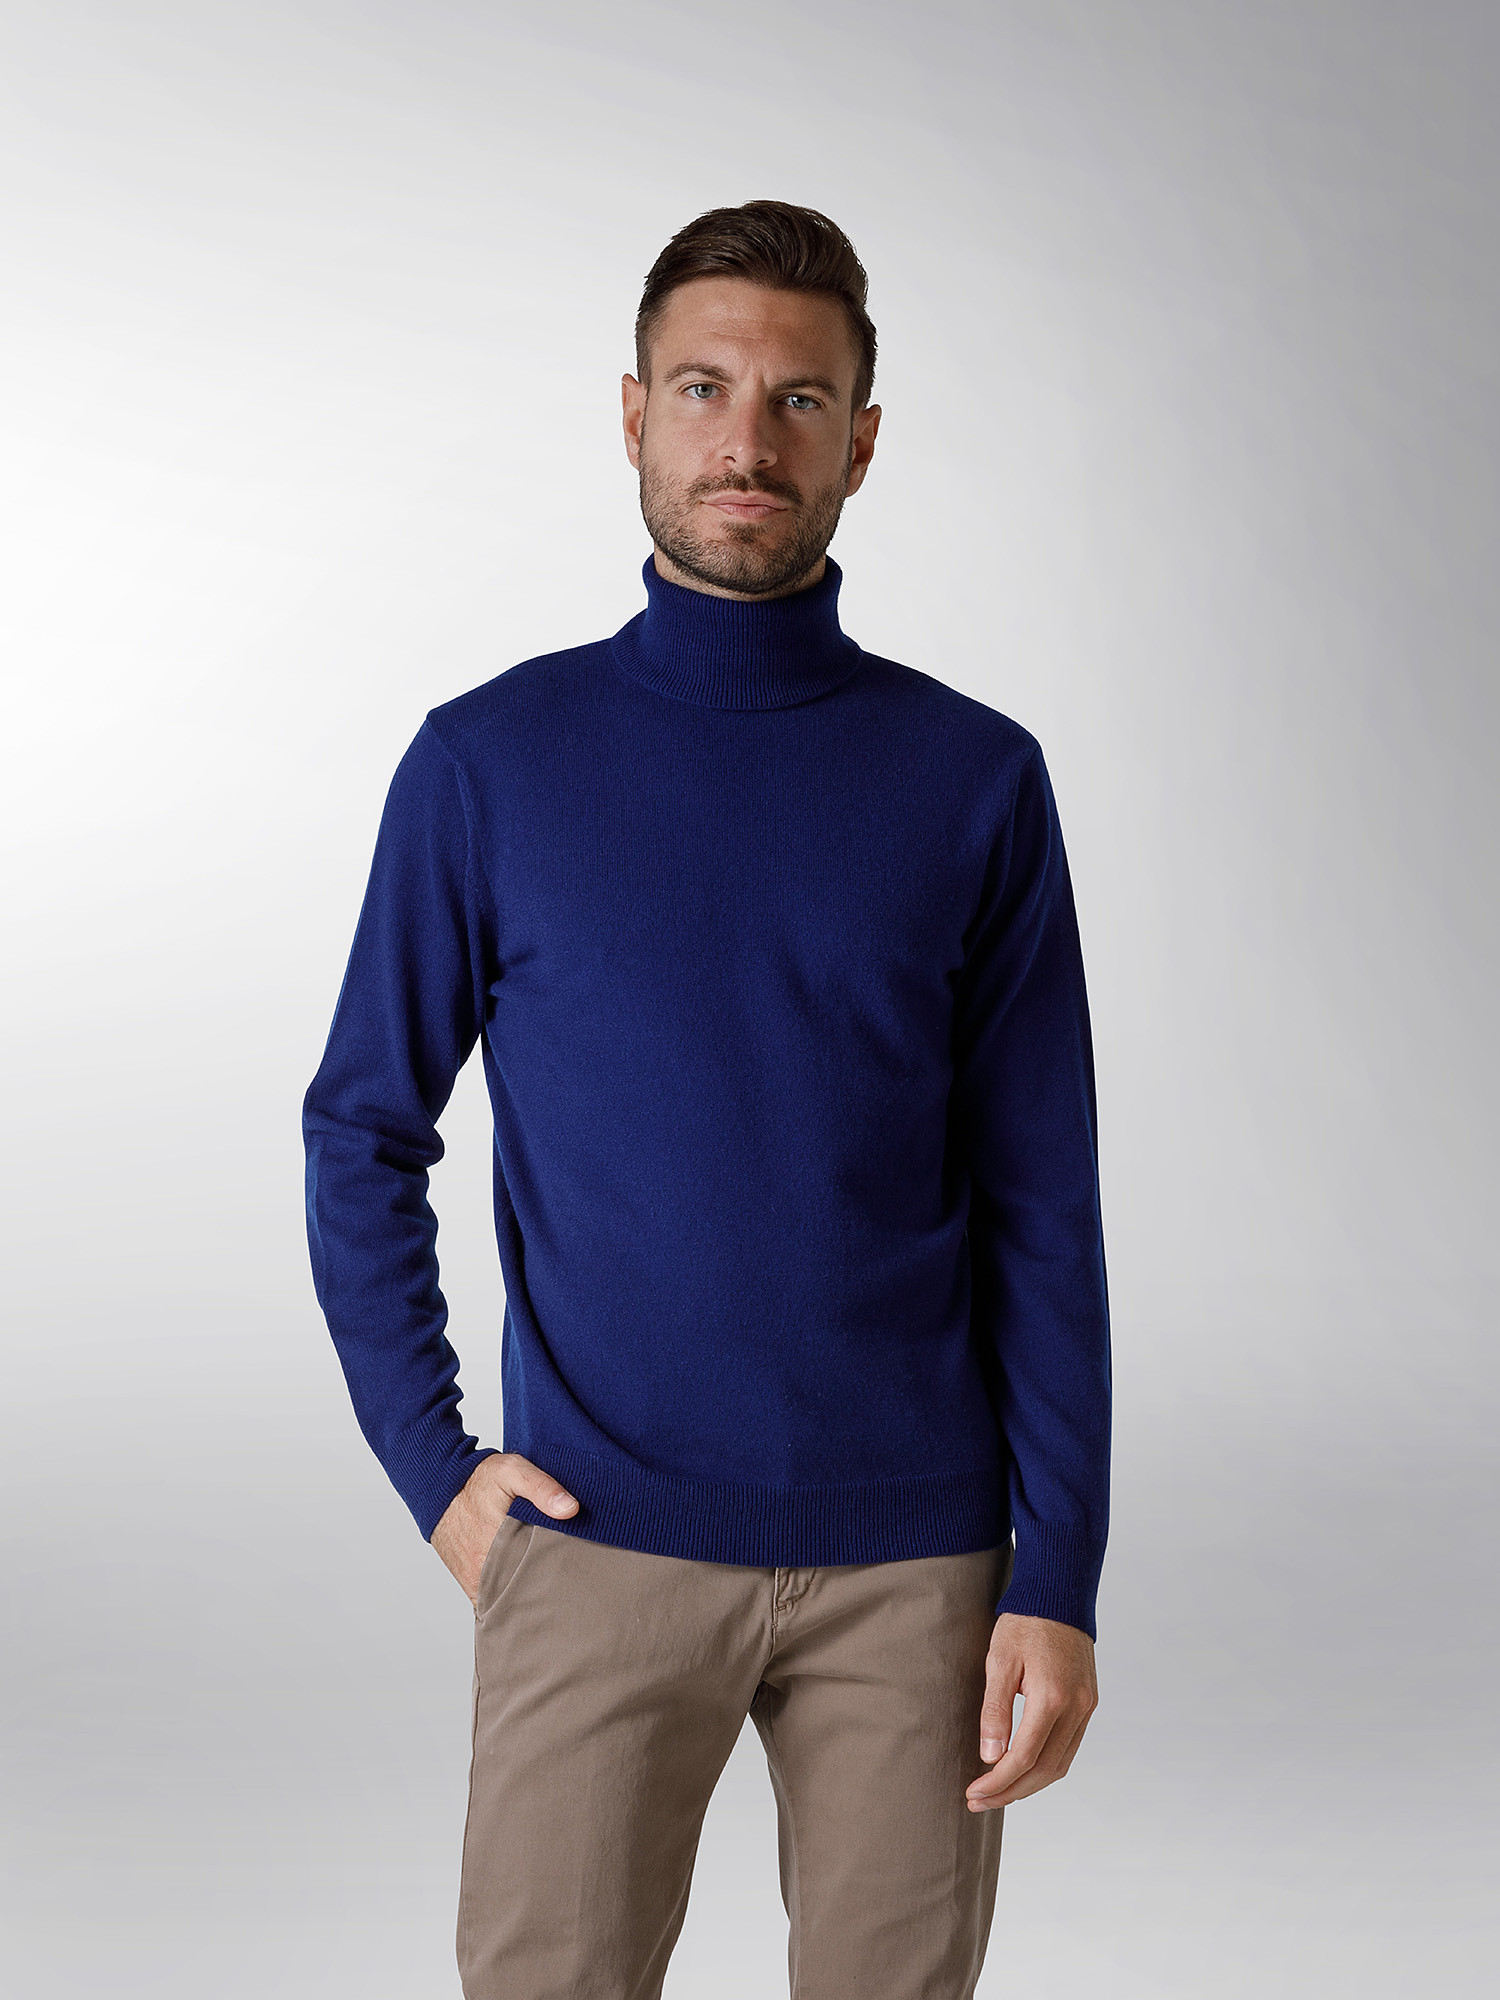 Coin Cashmere - Dolcevita in puro cashmere premium, Blu royal, large image number 1